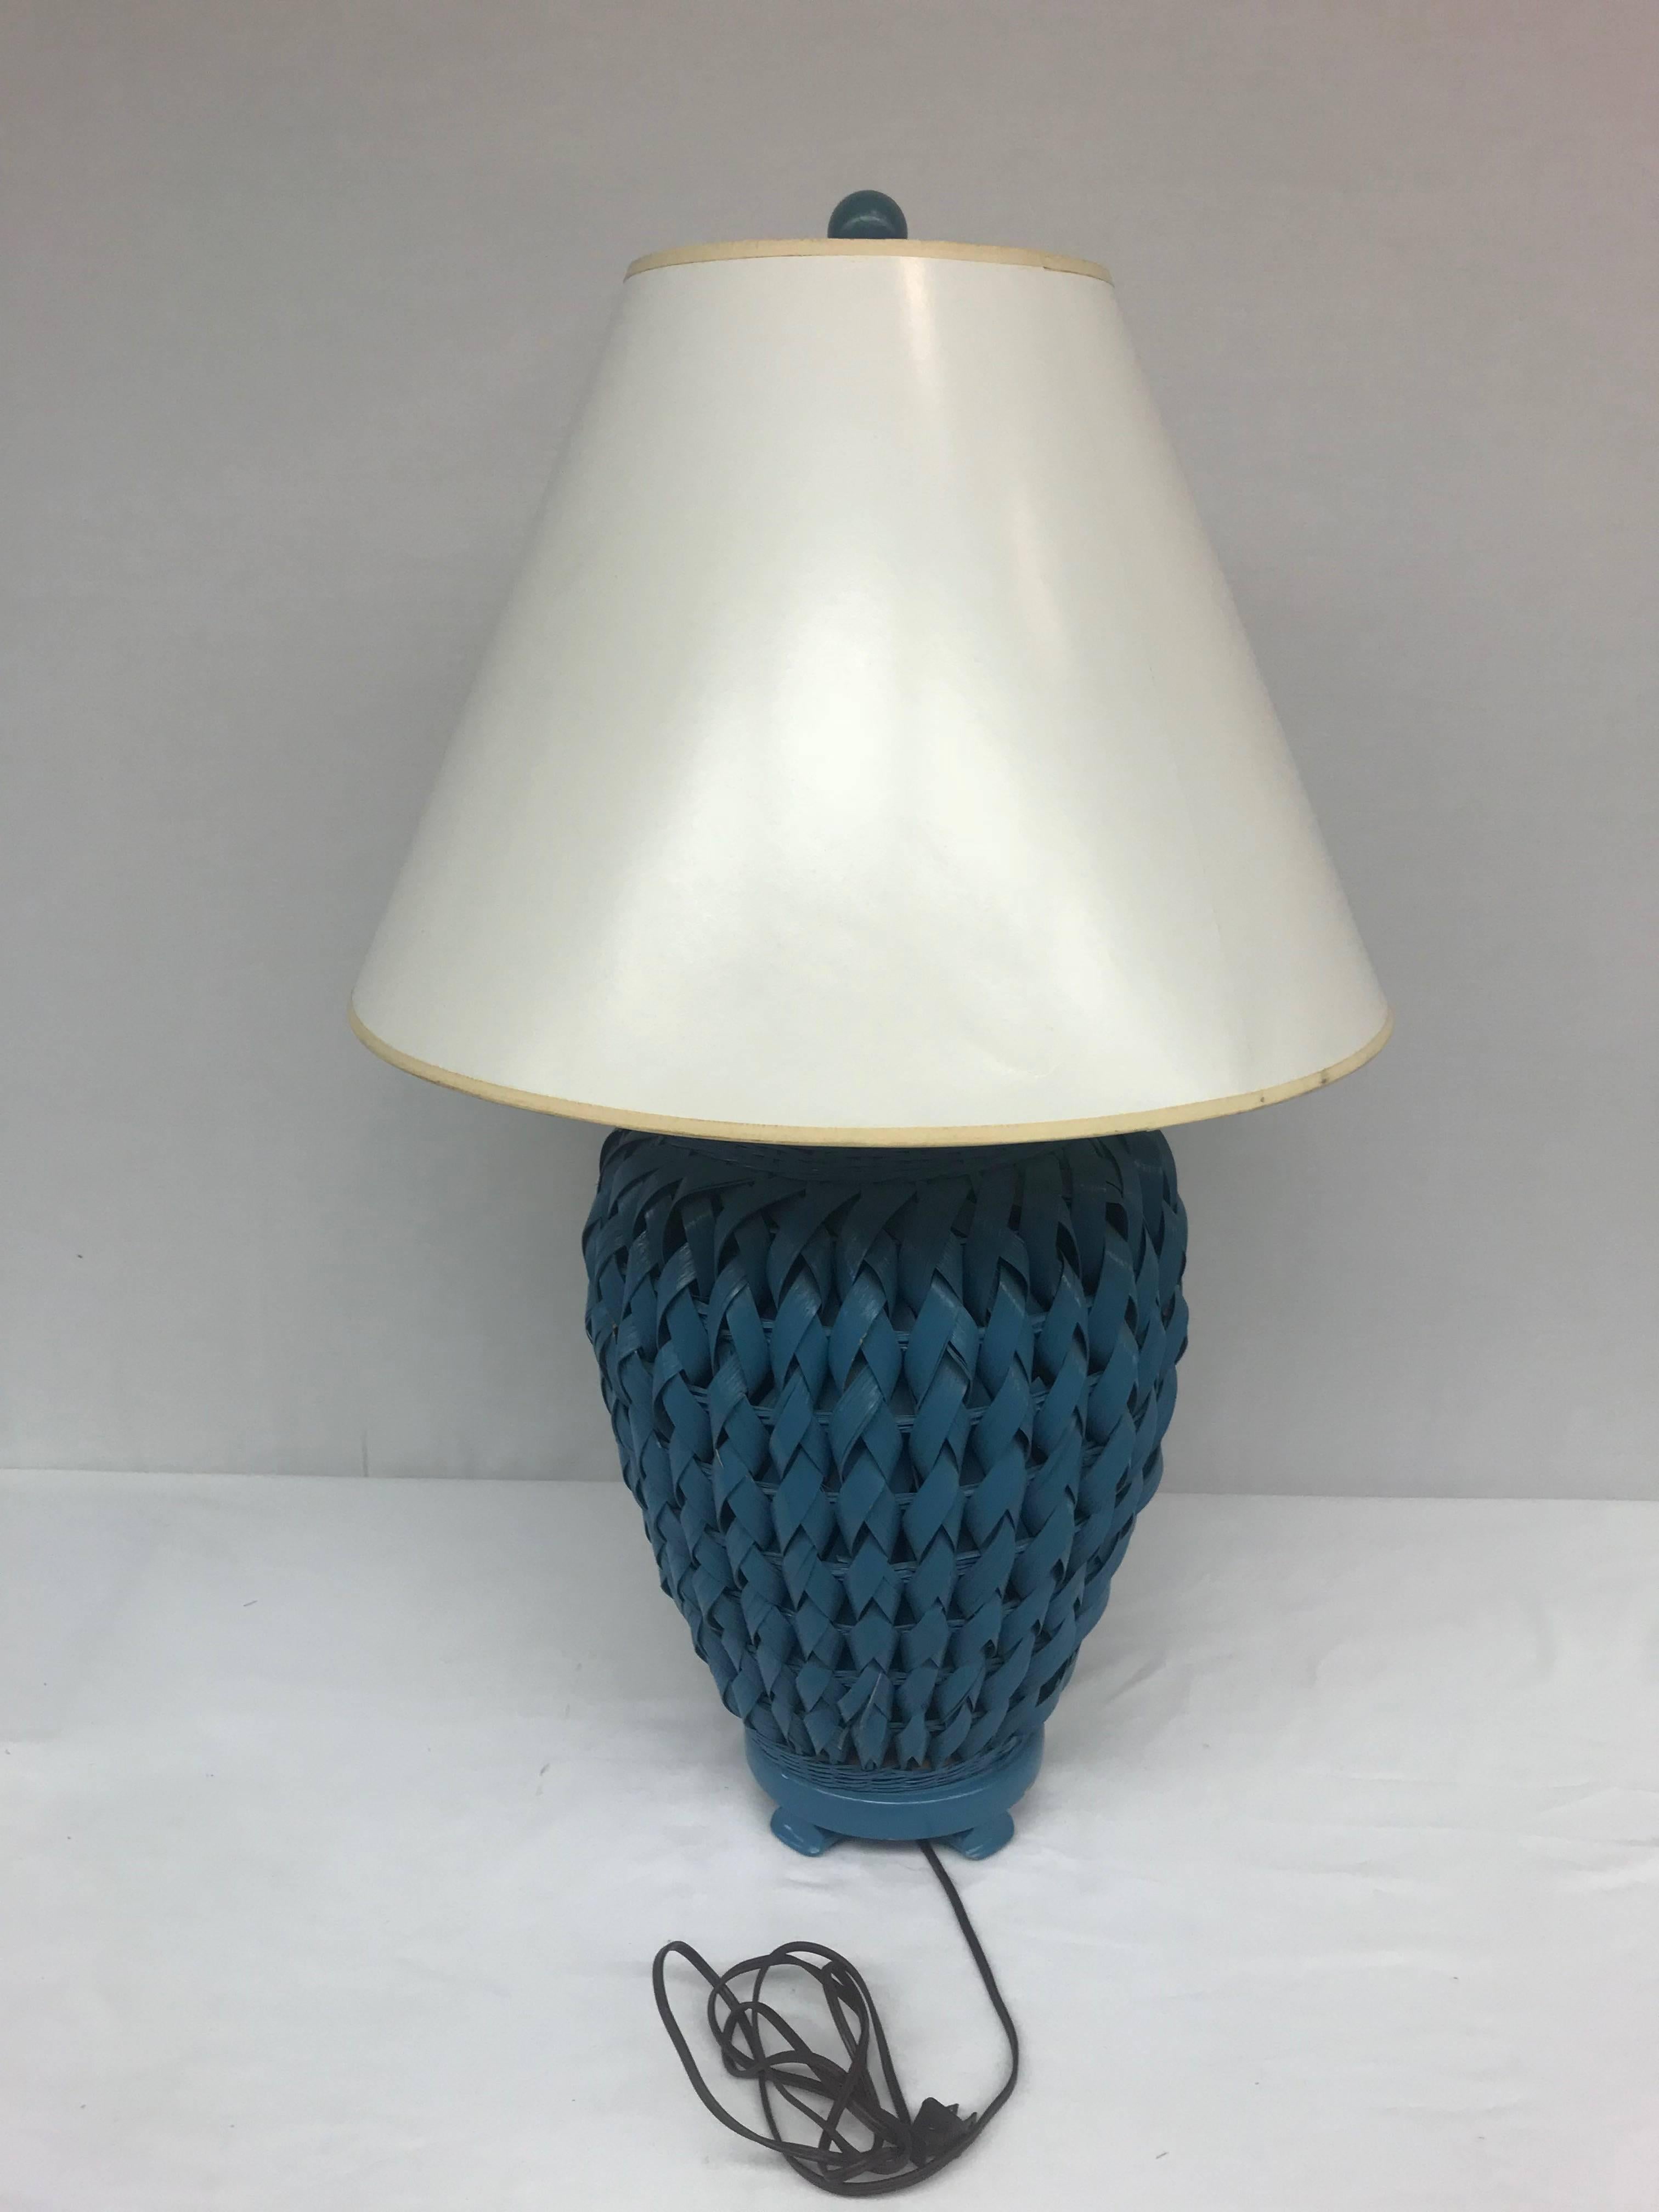 Blue Woven Wicker Table Lamp with Lacquered Shade In Good Condition For Sale In High Point, NC